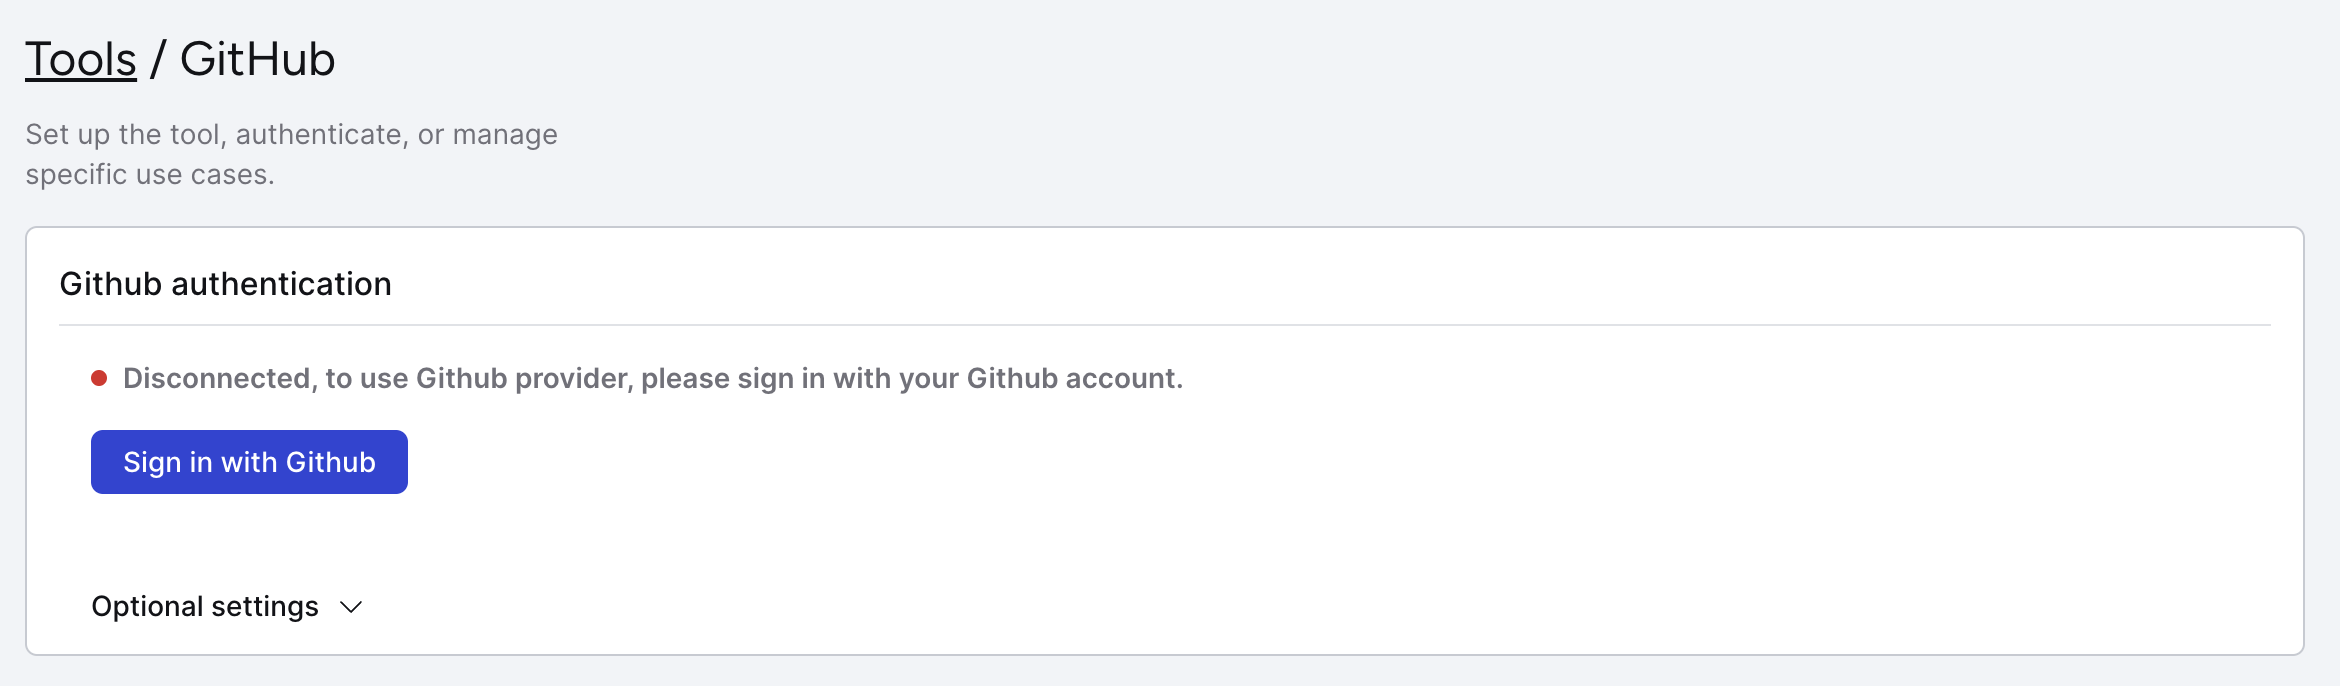 Connect to GitHub to authenticate the access you need